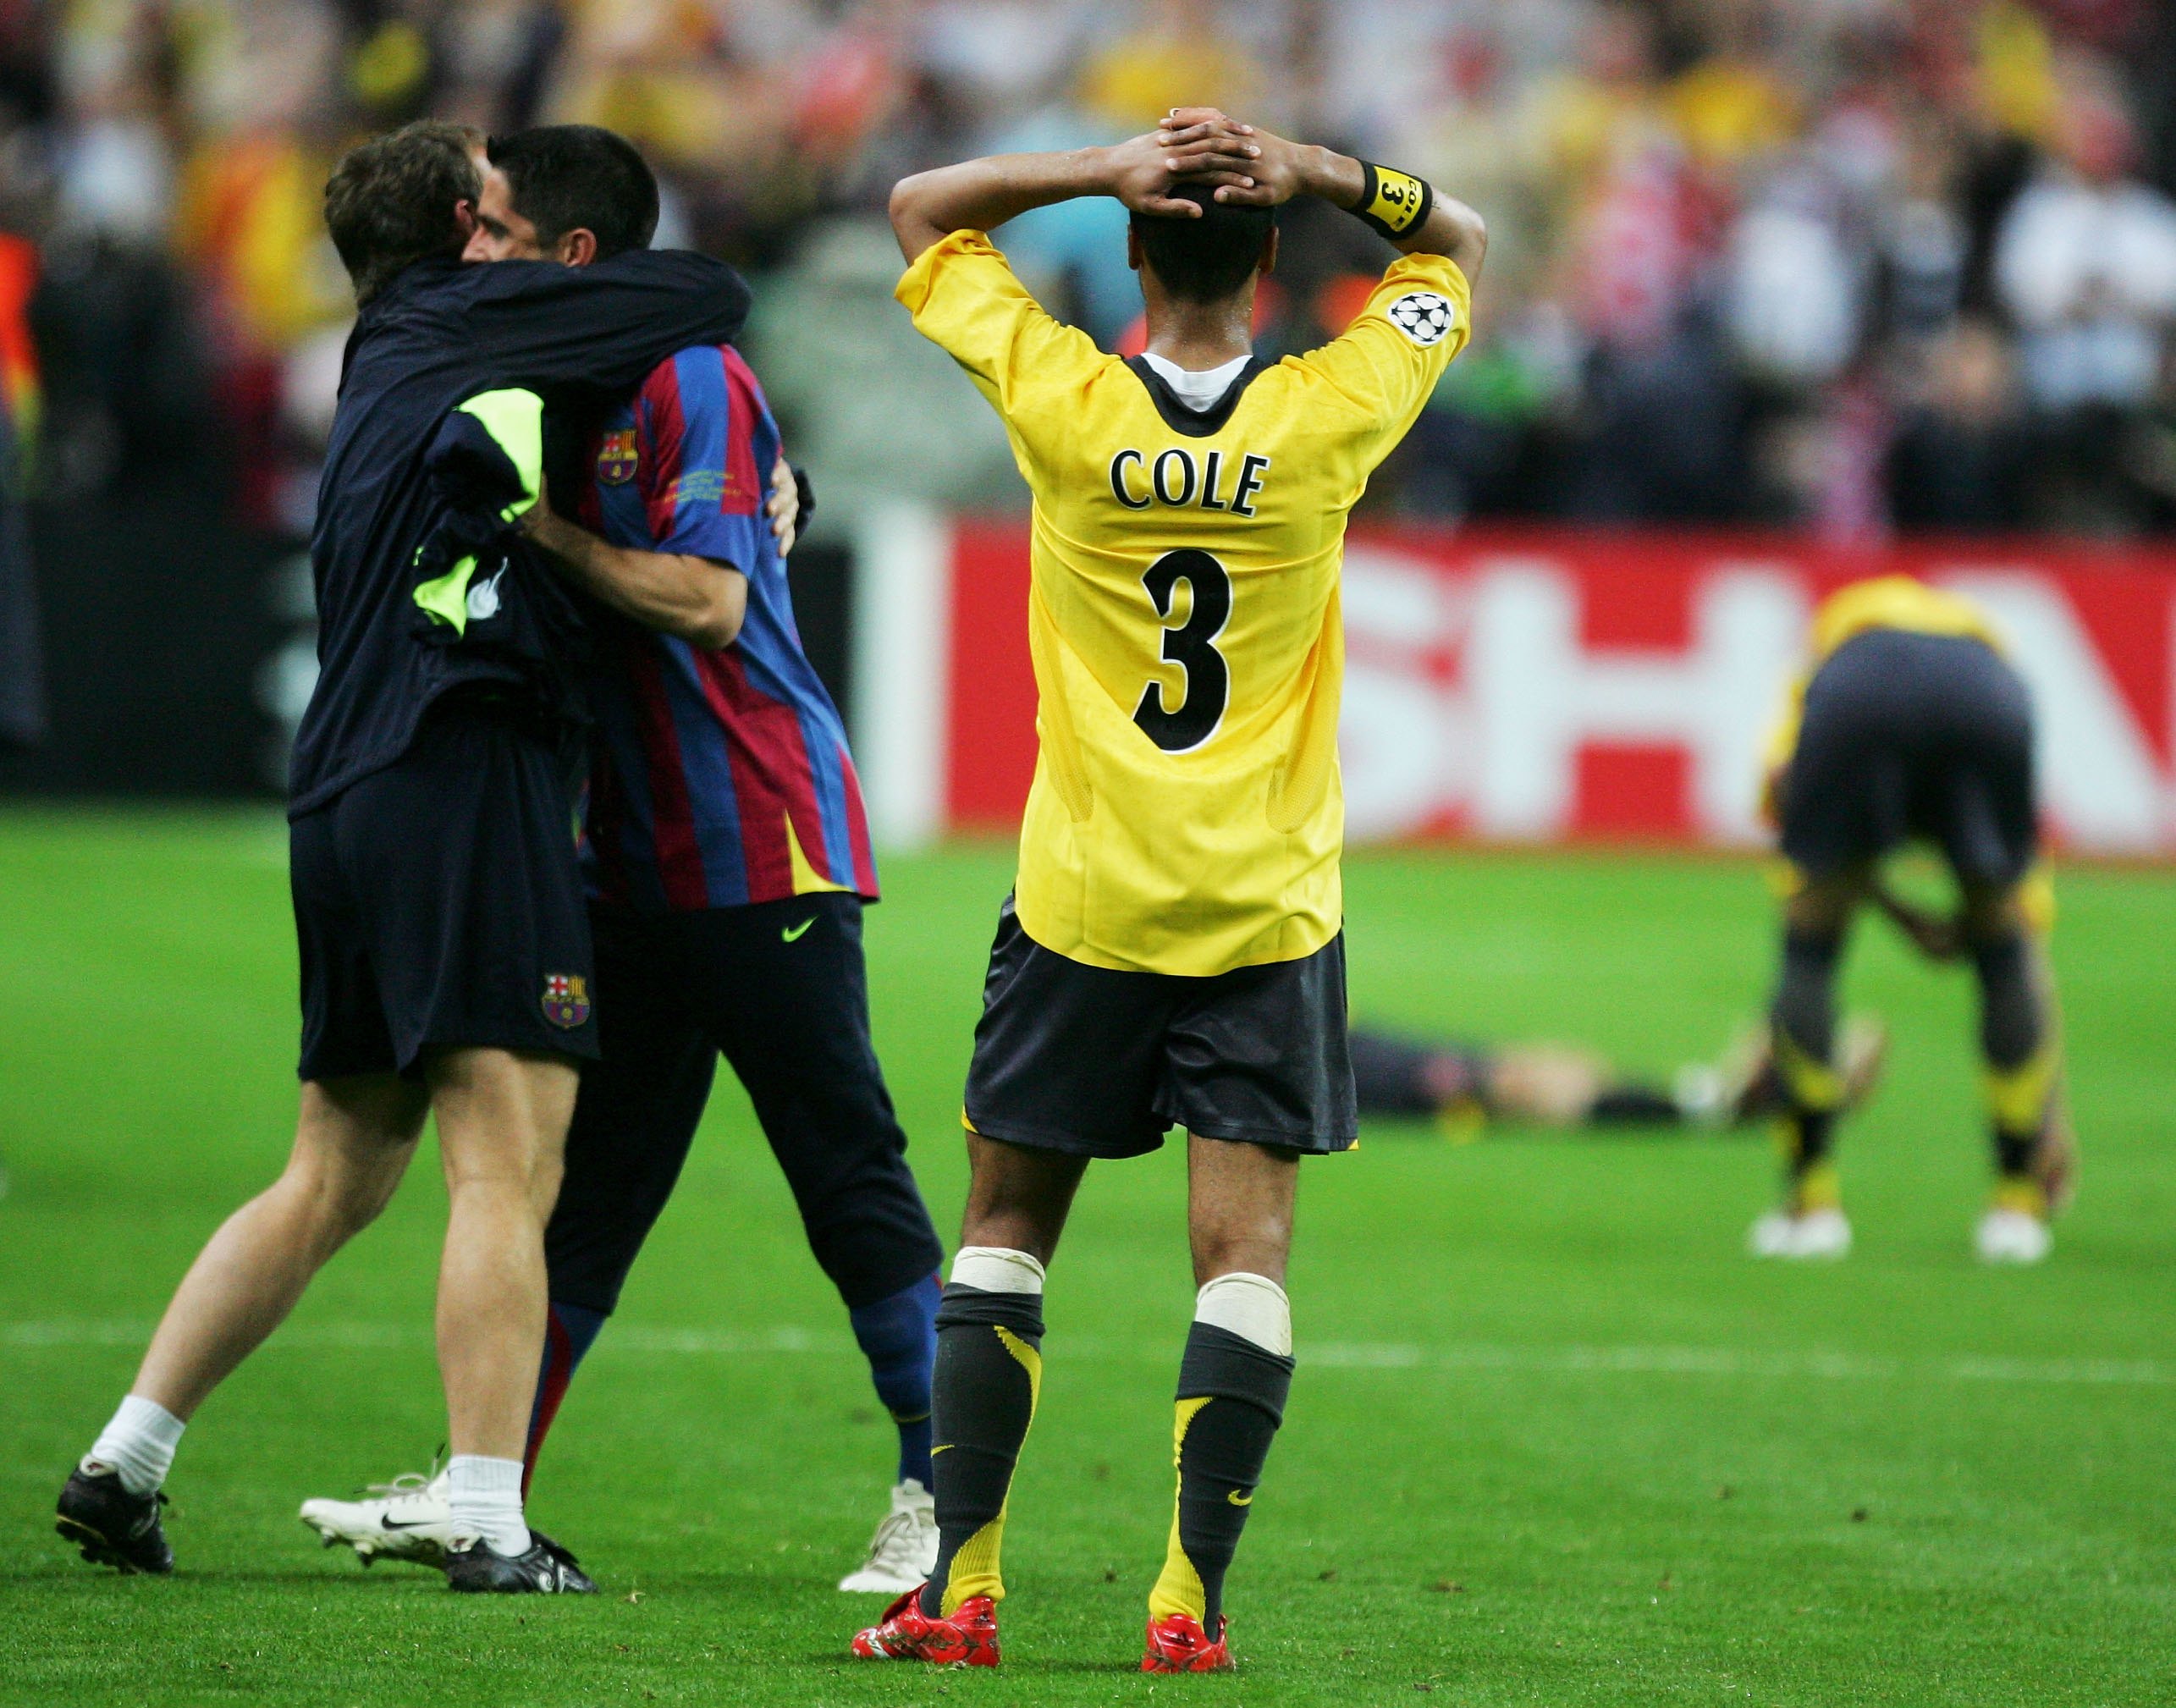 PARIS - MAY 17:  Ashley Cole of Arsenal holds his head in despair after his teams defeat in the UEFA Champions League Final between Arsenal and Barcelona at the Stade de France on May 17, 2006 in Paris, France.  (Photo by Laurence Griffiths/Getty Images)